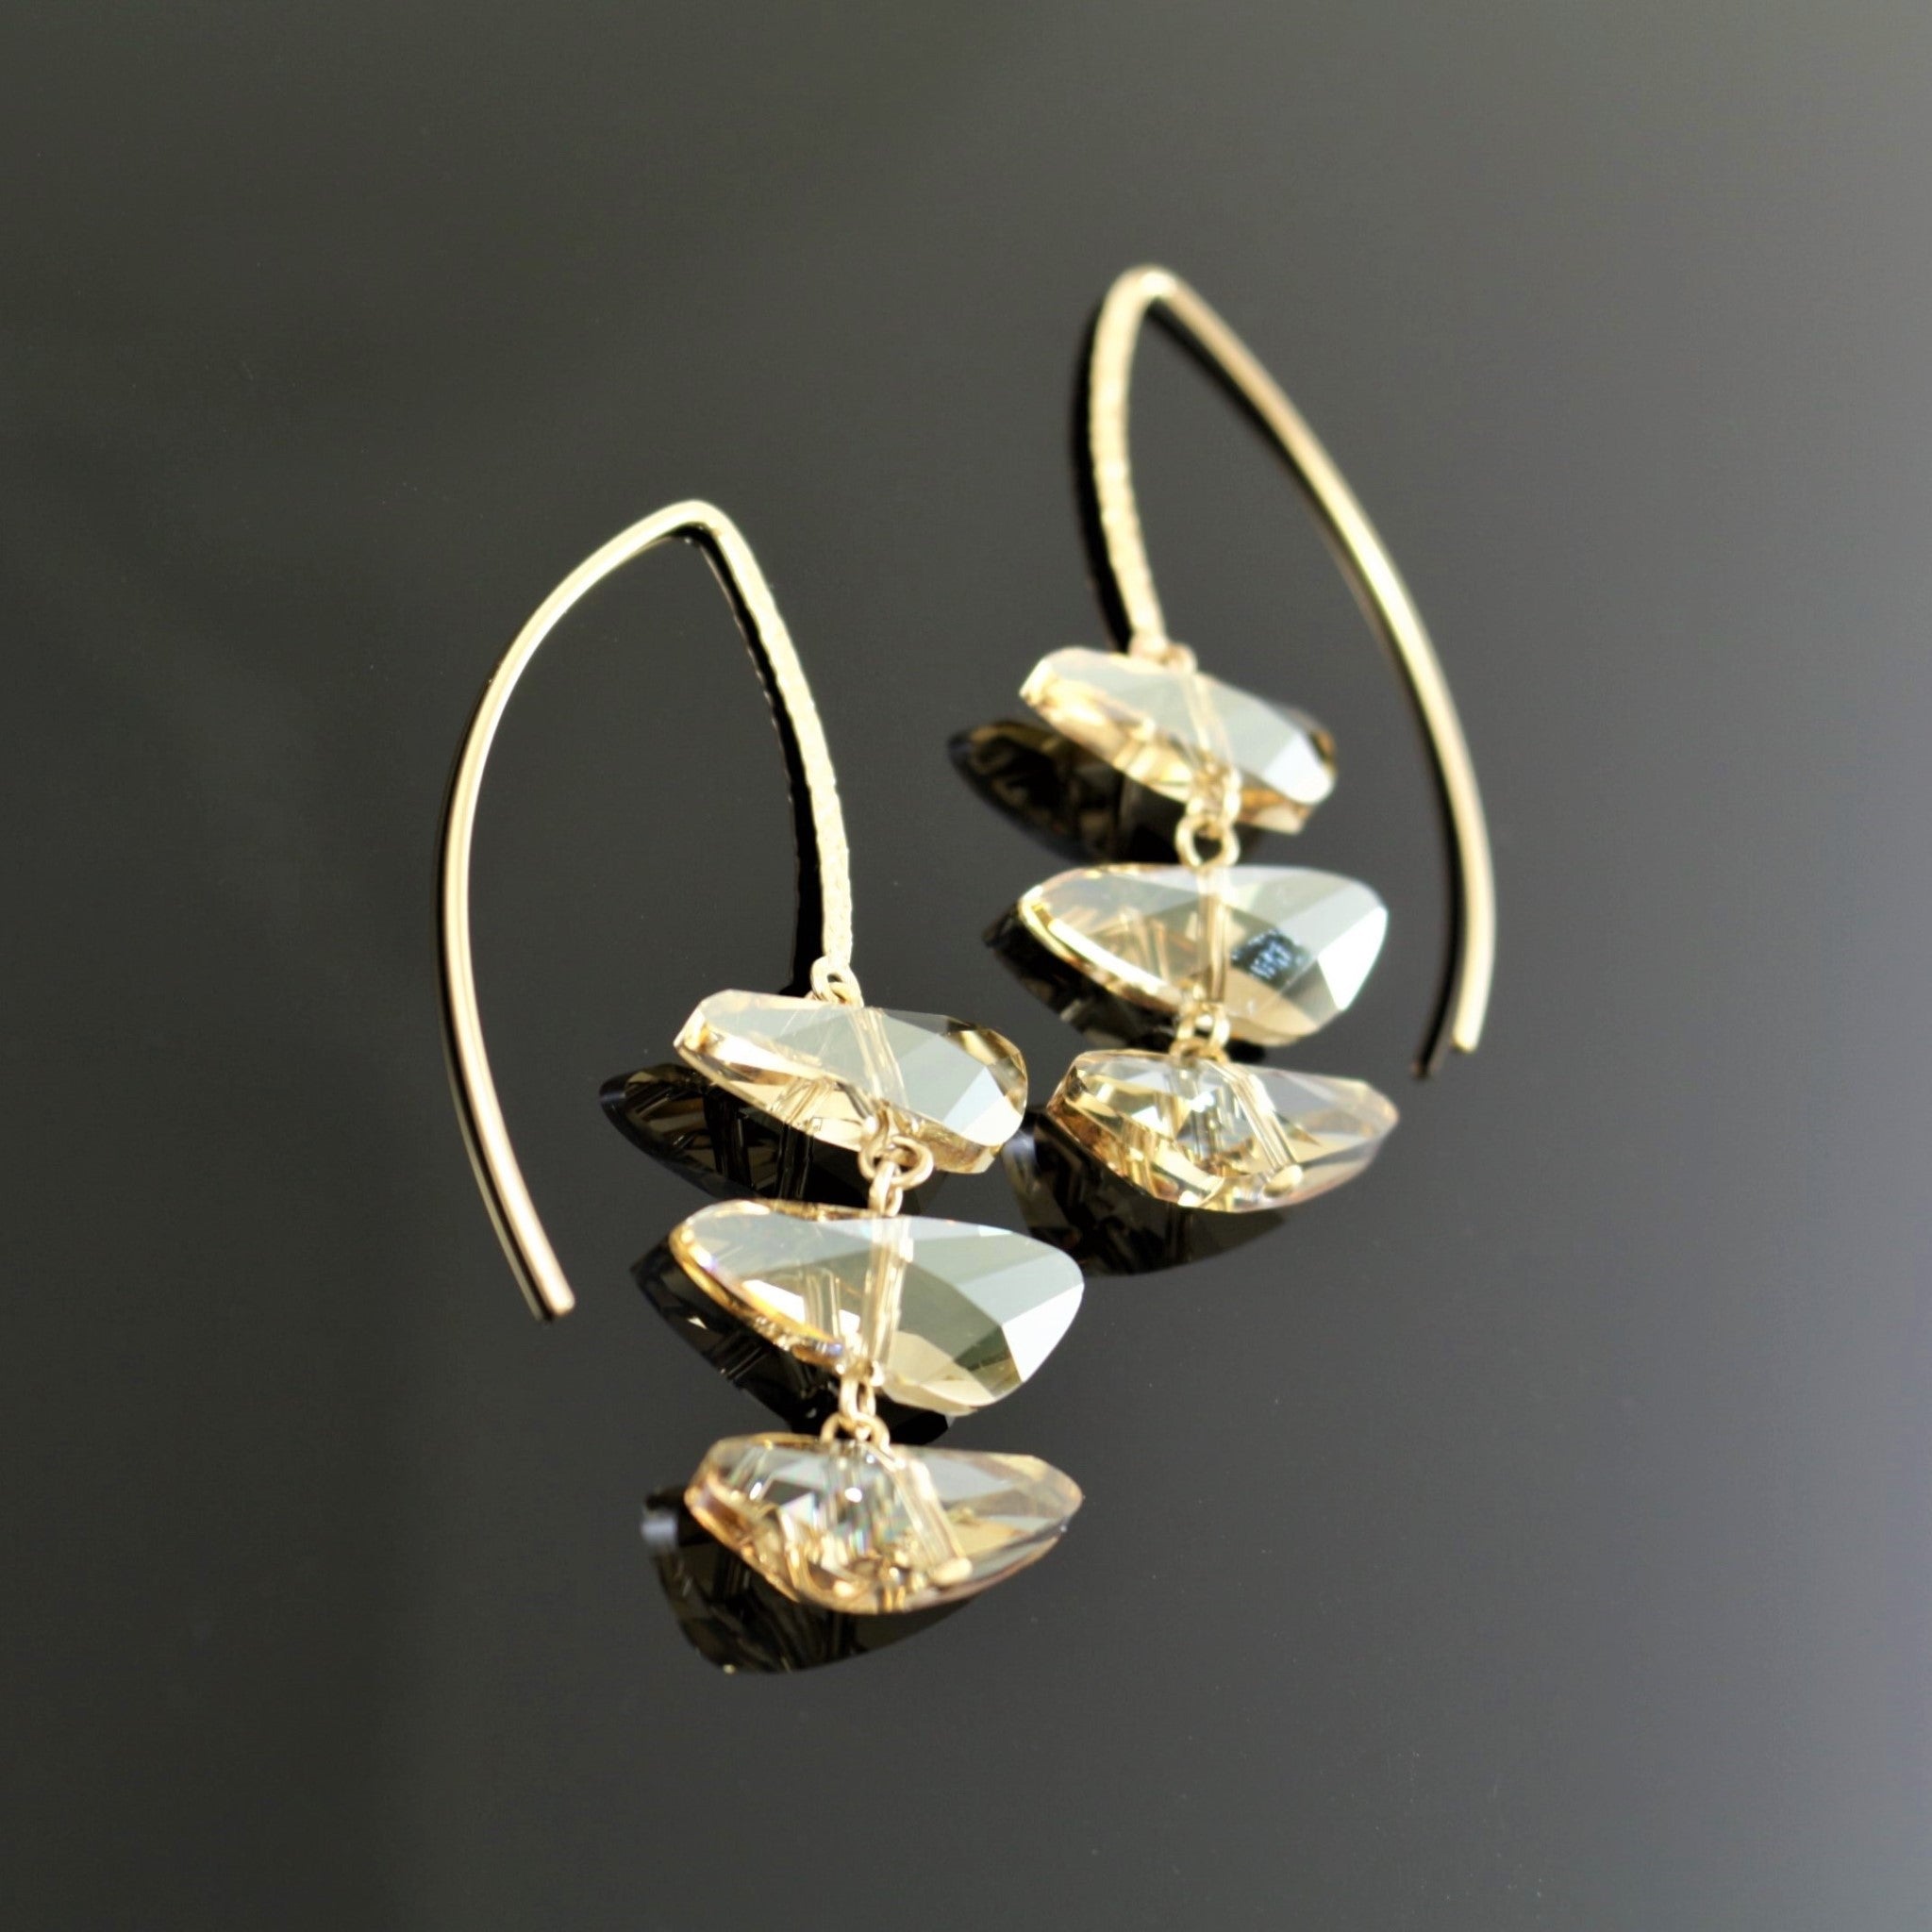 Reflections Earrings in Gold Shimmer